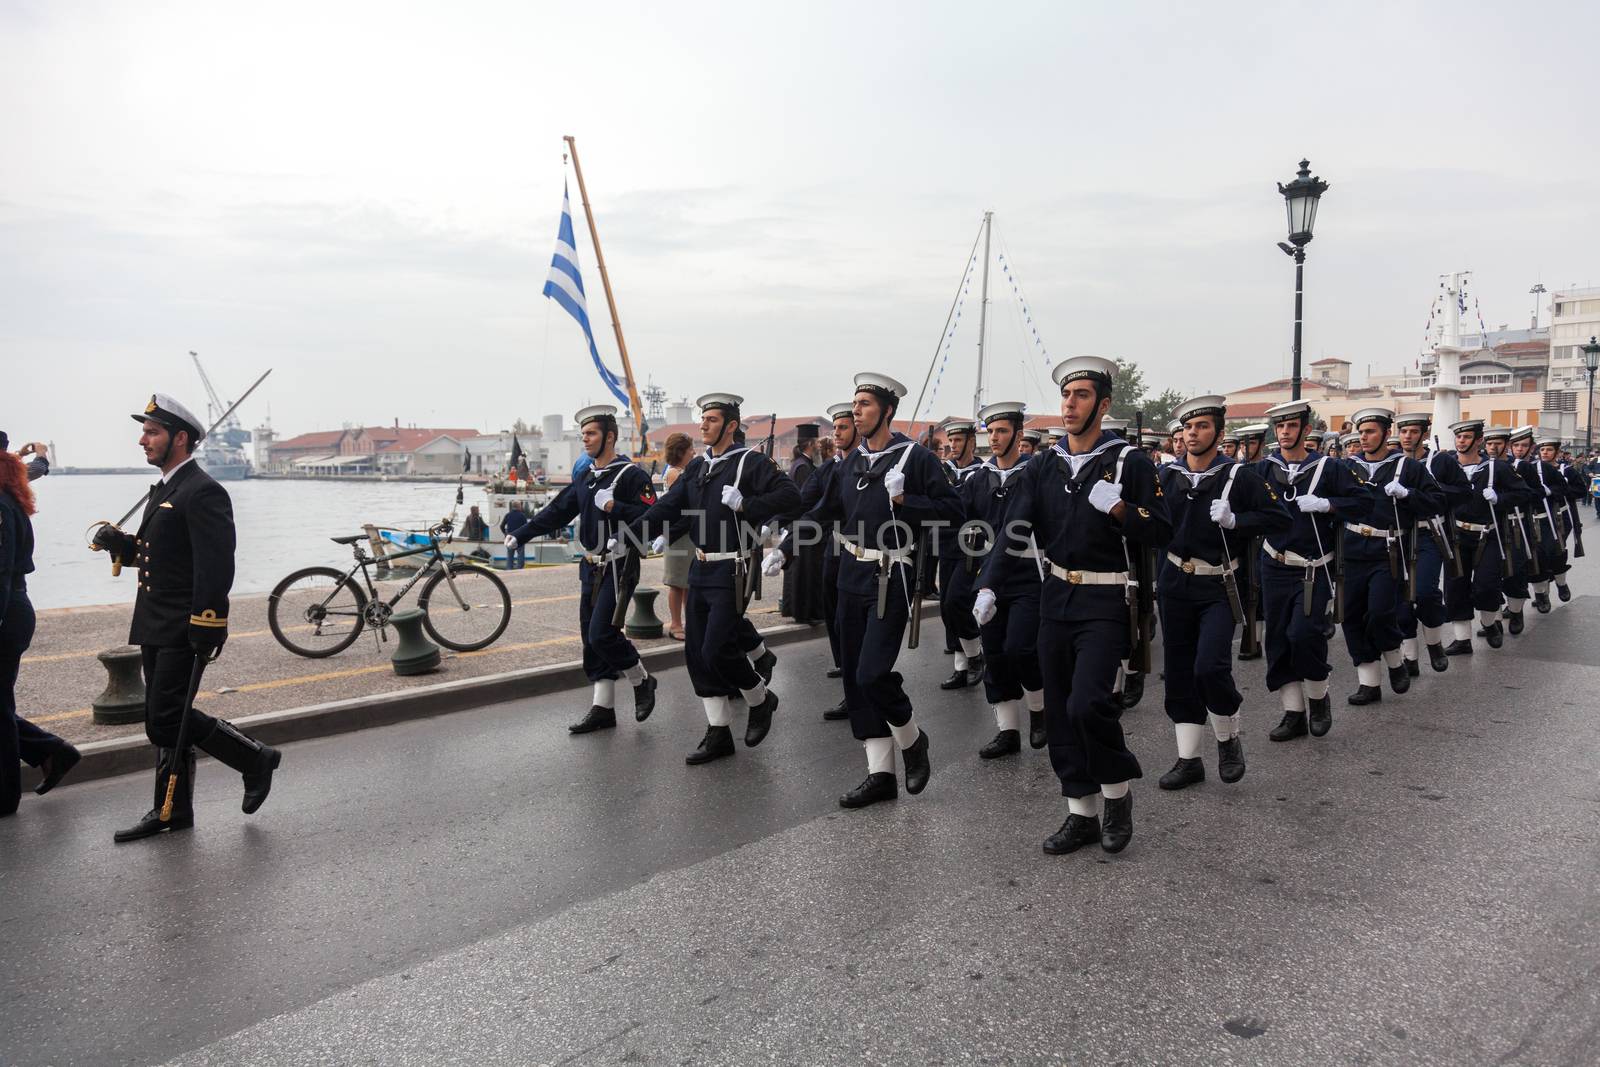 100th liberation anniversary from the City's 500 years Ottoman by Portokalis